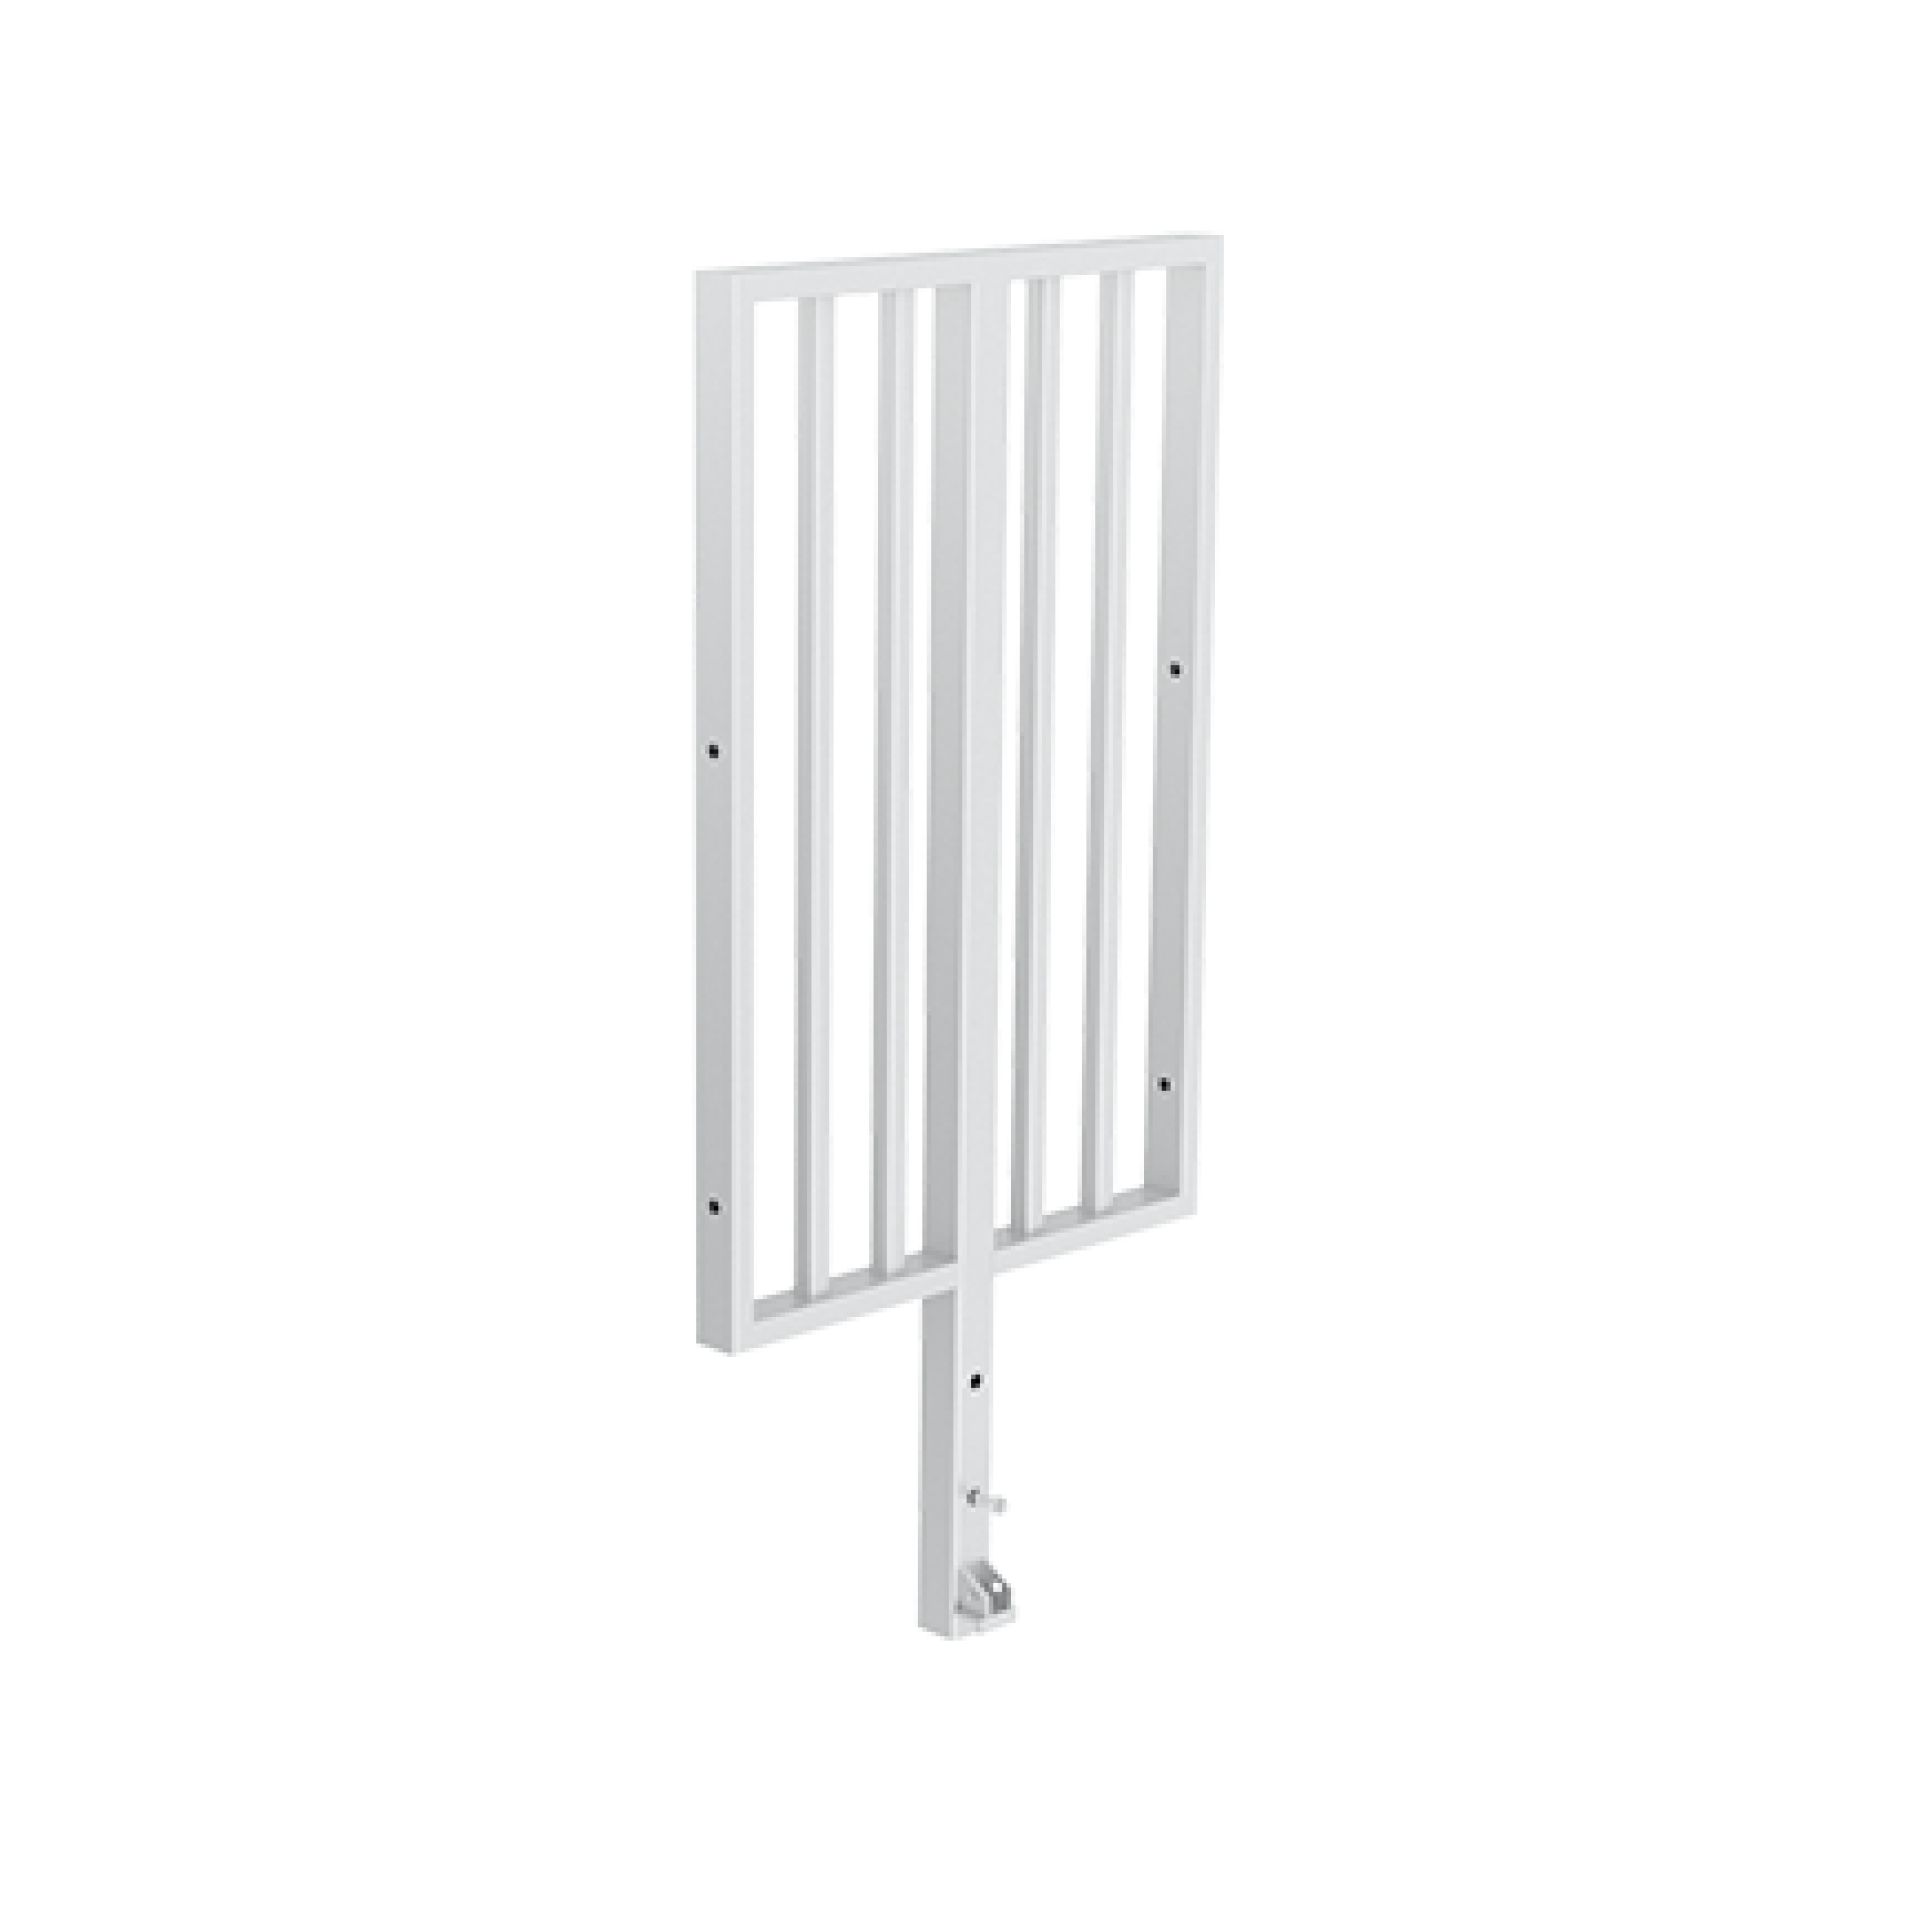 2ft Handrail with vertical bars